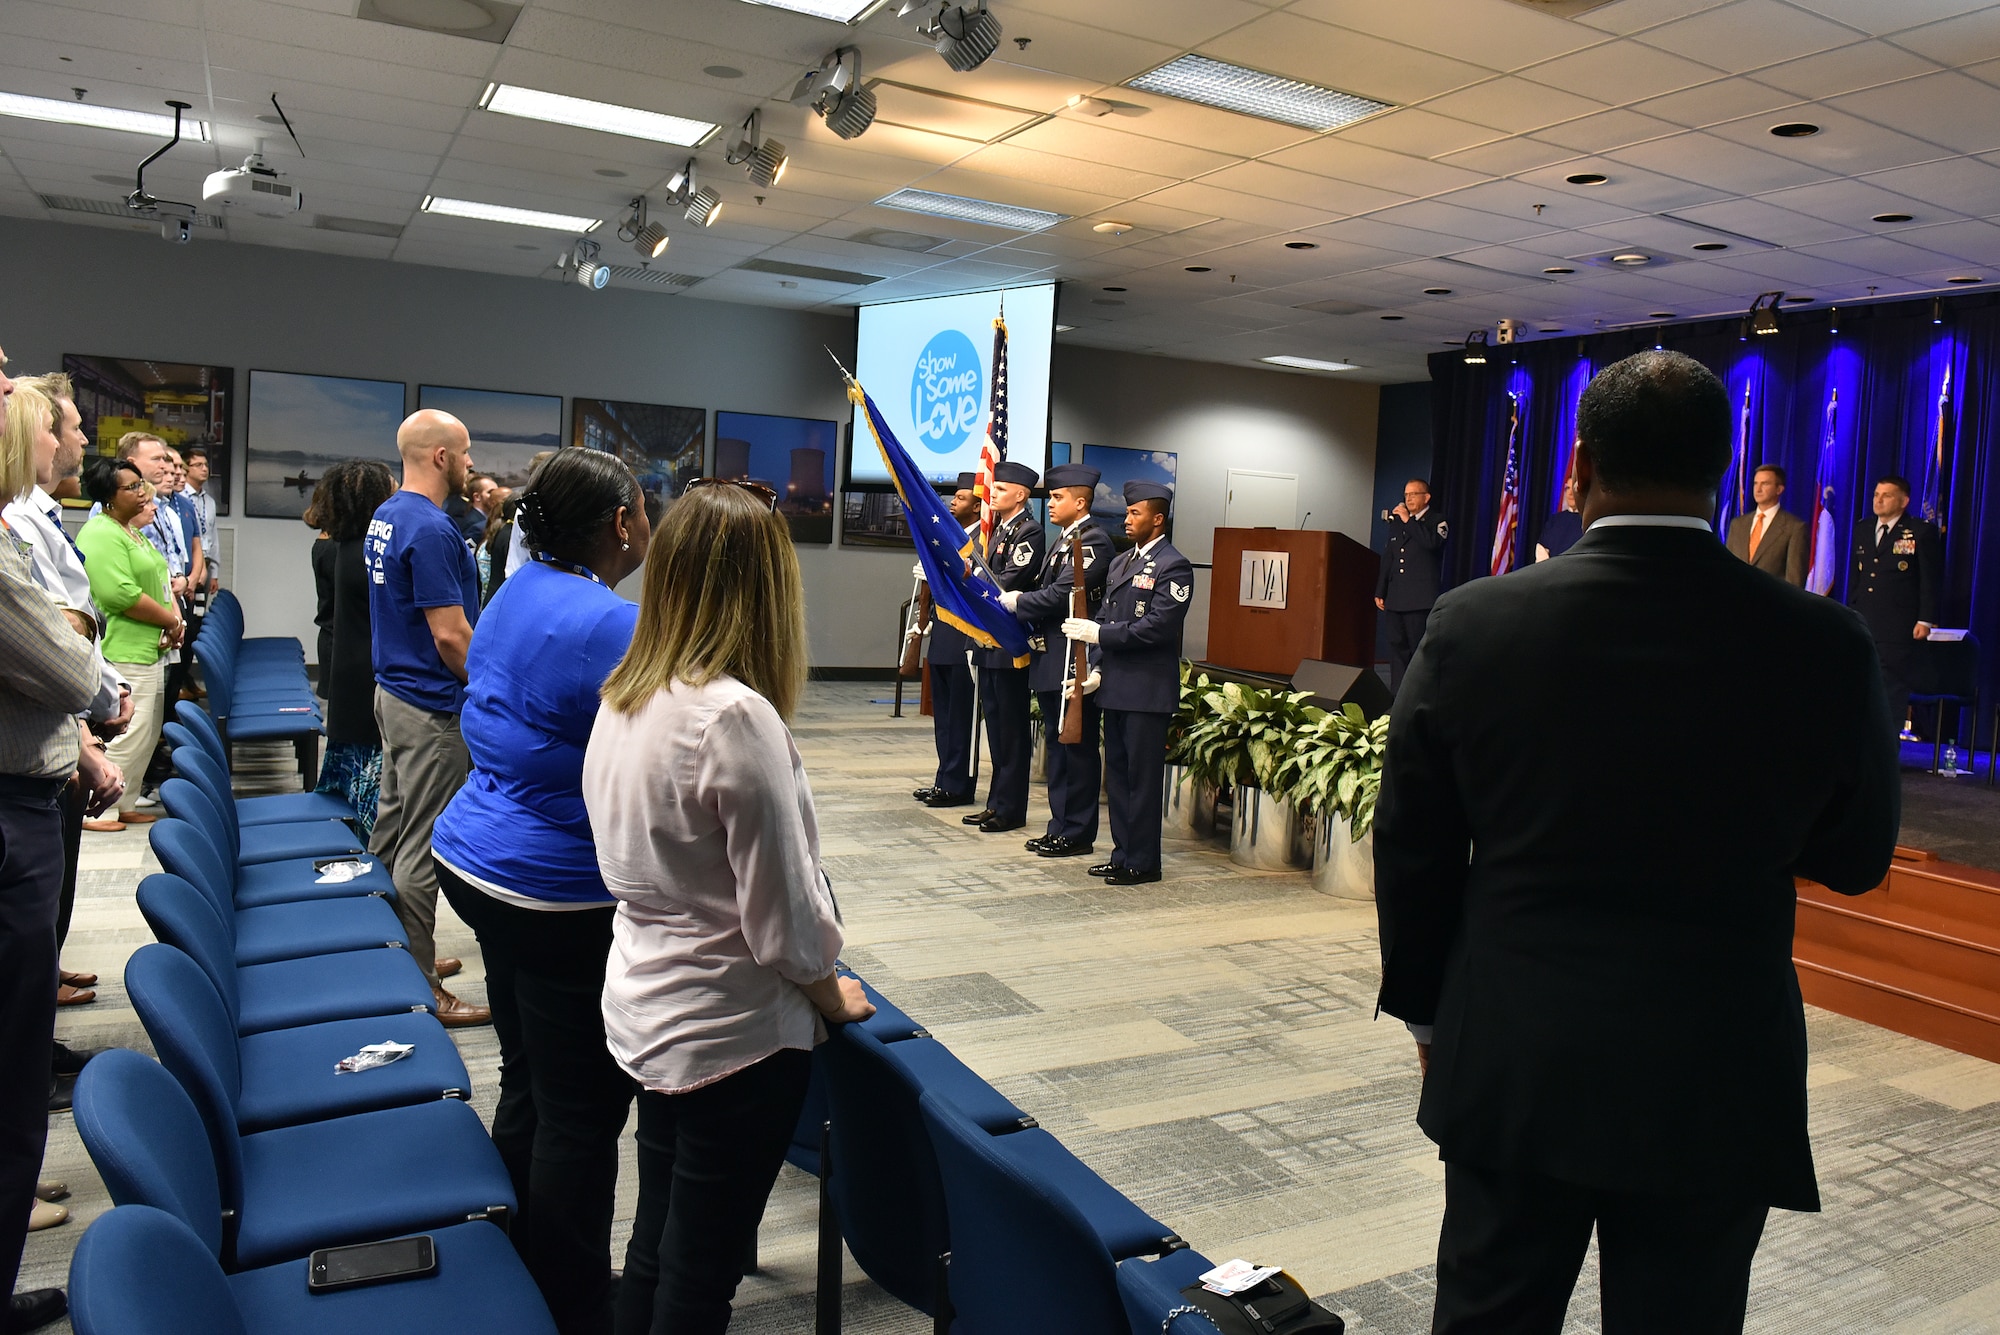 Airmen from the I.G. Brown Training and Education Center present the colors and sing the National Anthem Sept. 7, 2016, during the Smoky Mountain Region Combined Federal Campaign kickoff with other CFC representatives and federal employees at the Tennessee Valley Authority headquarters in downtown Knoxville, Tenn. (U.S. Air National Guard photo by Master Sgt. Mike R Smith)